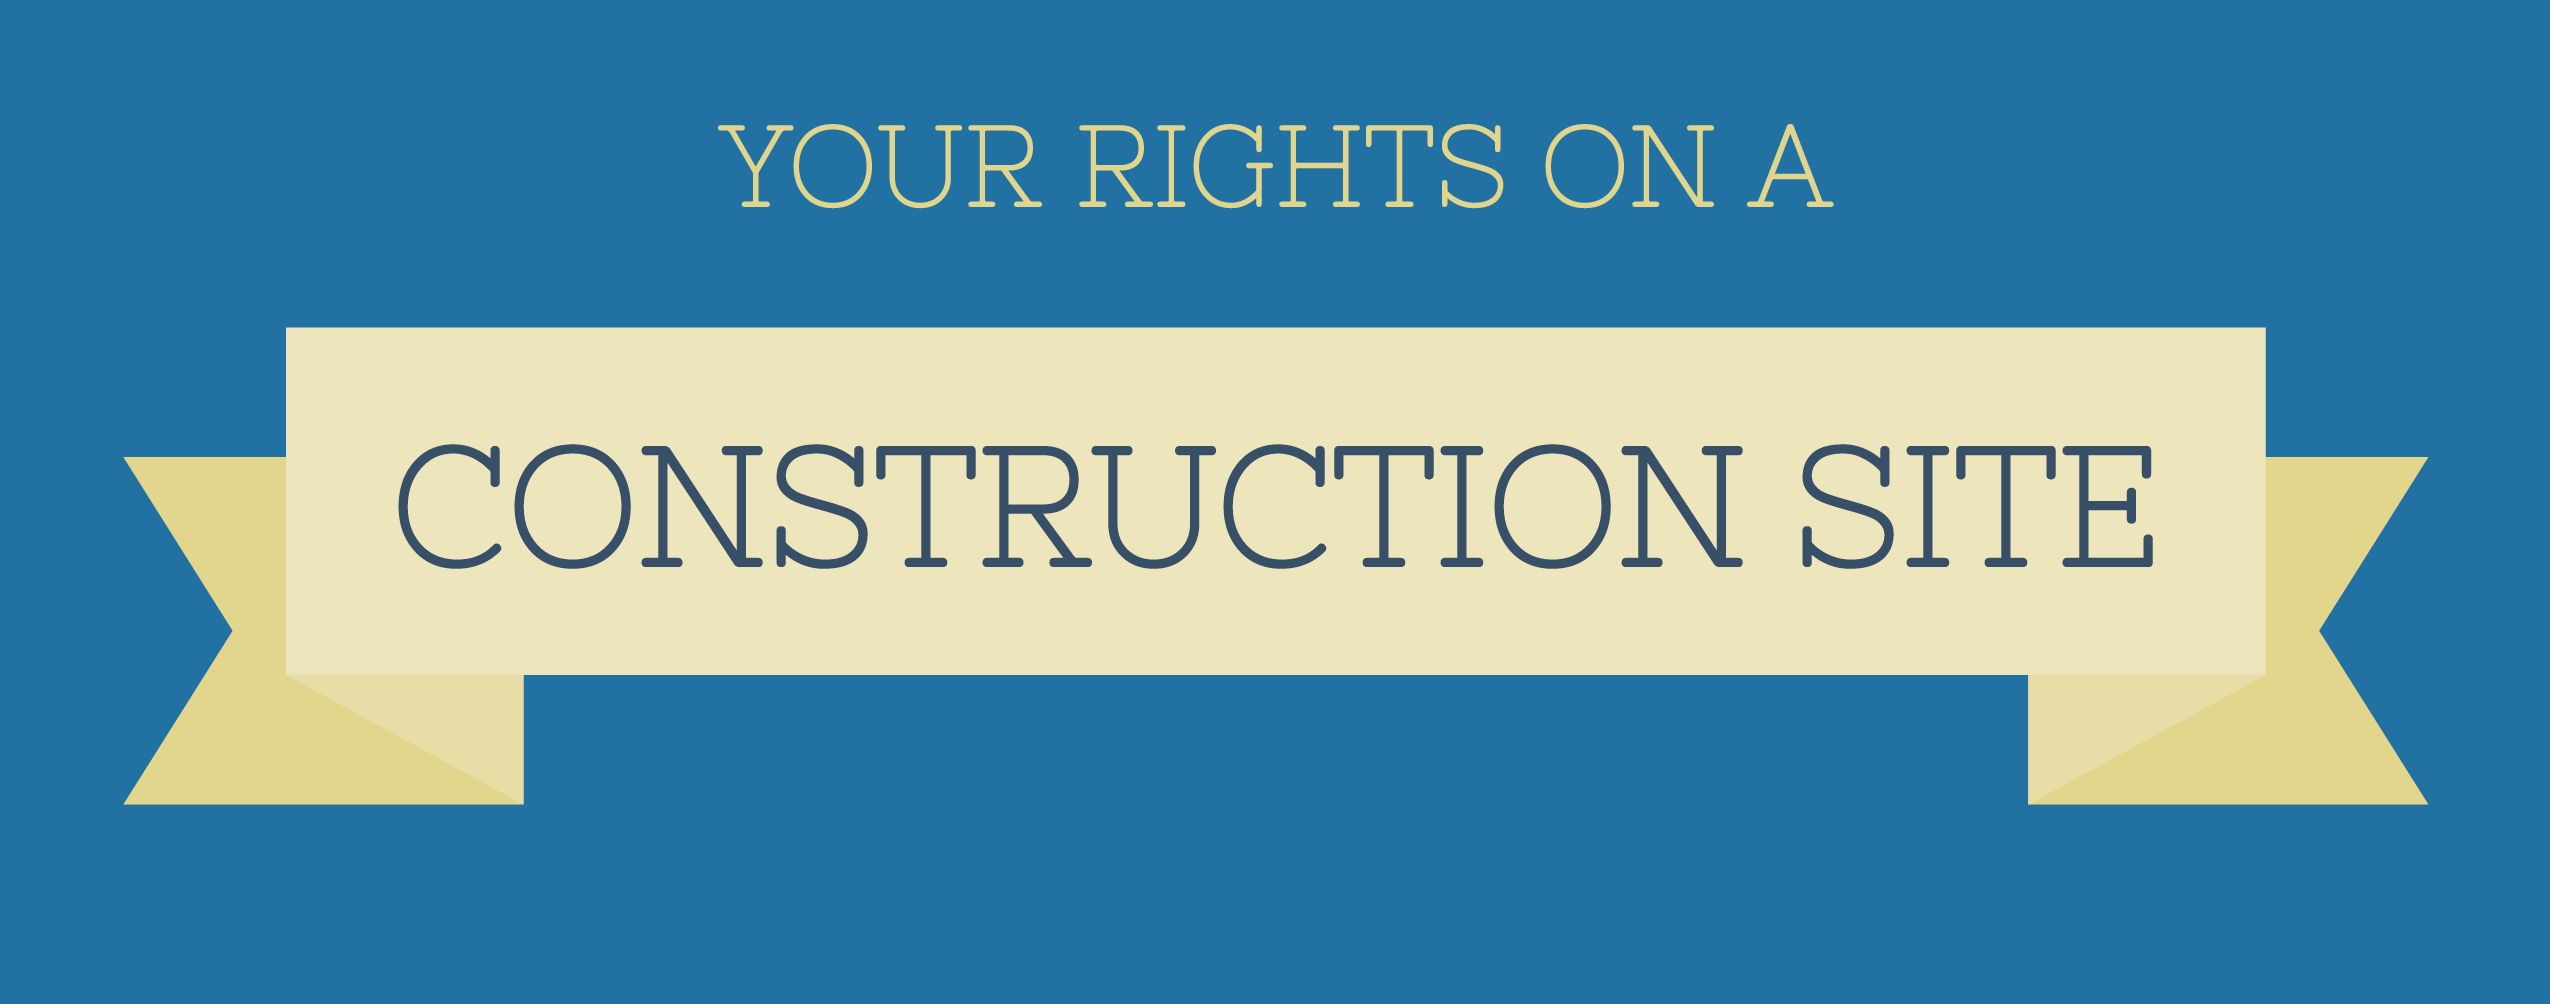 your rights on a construction site infographic header